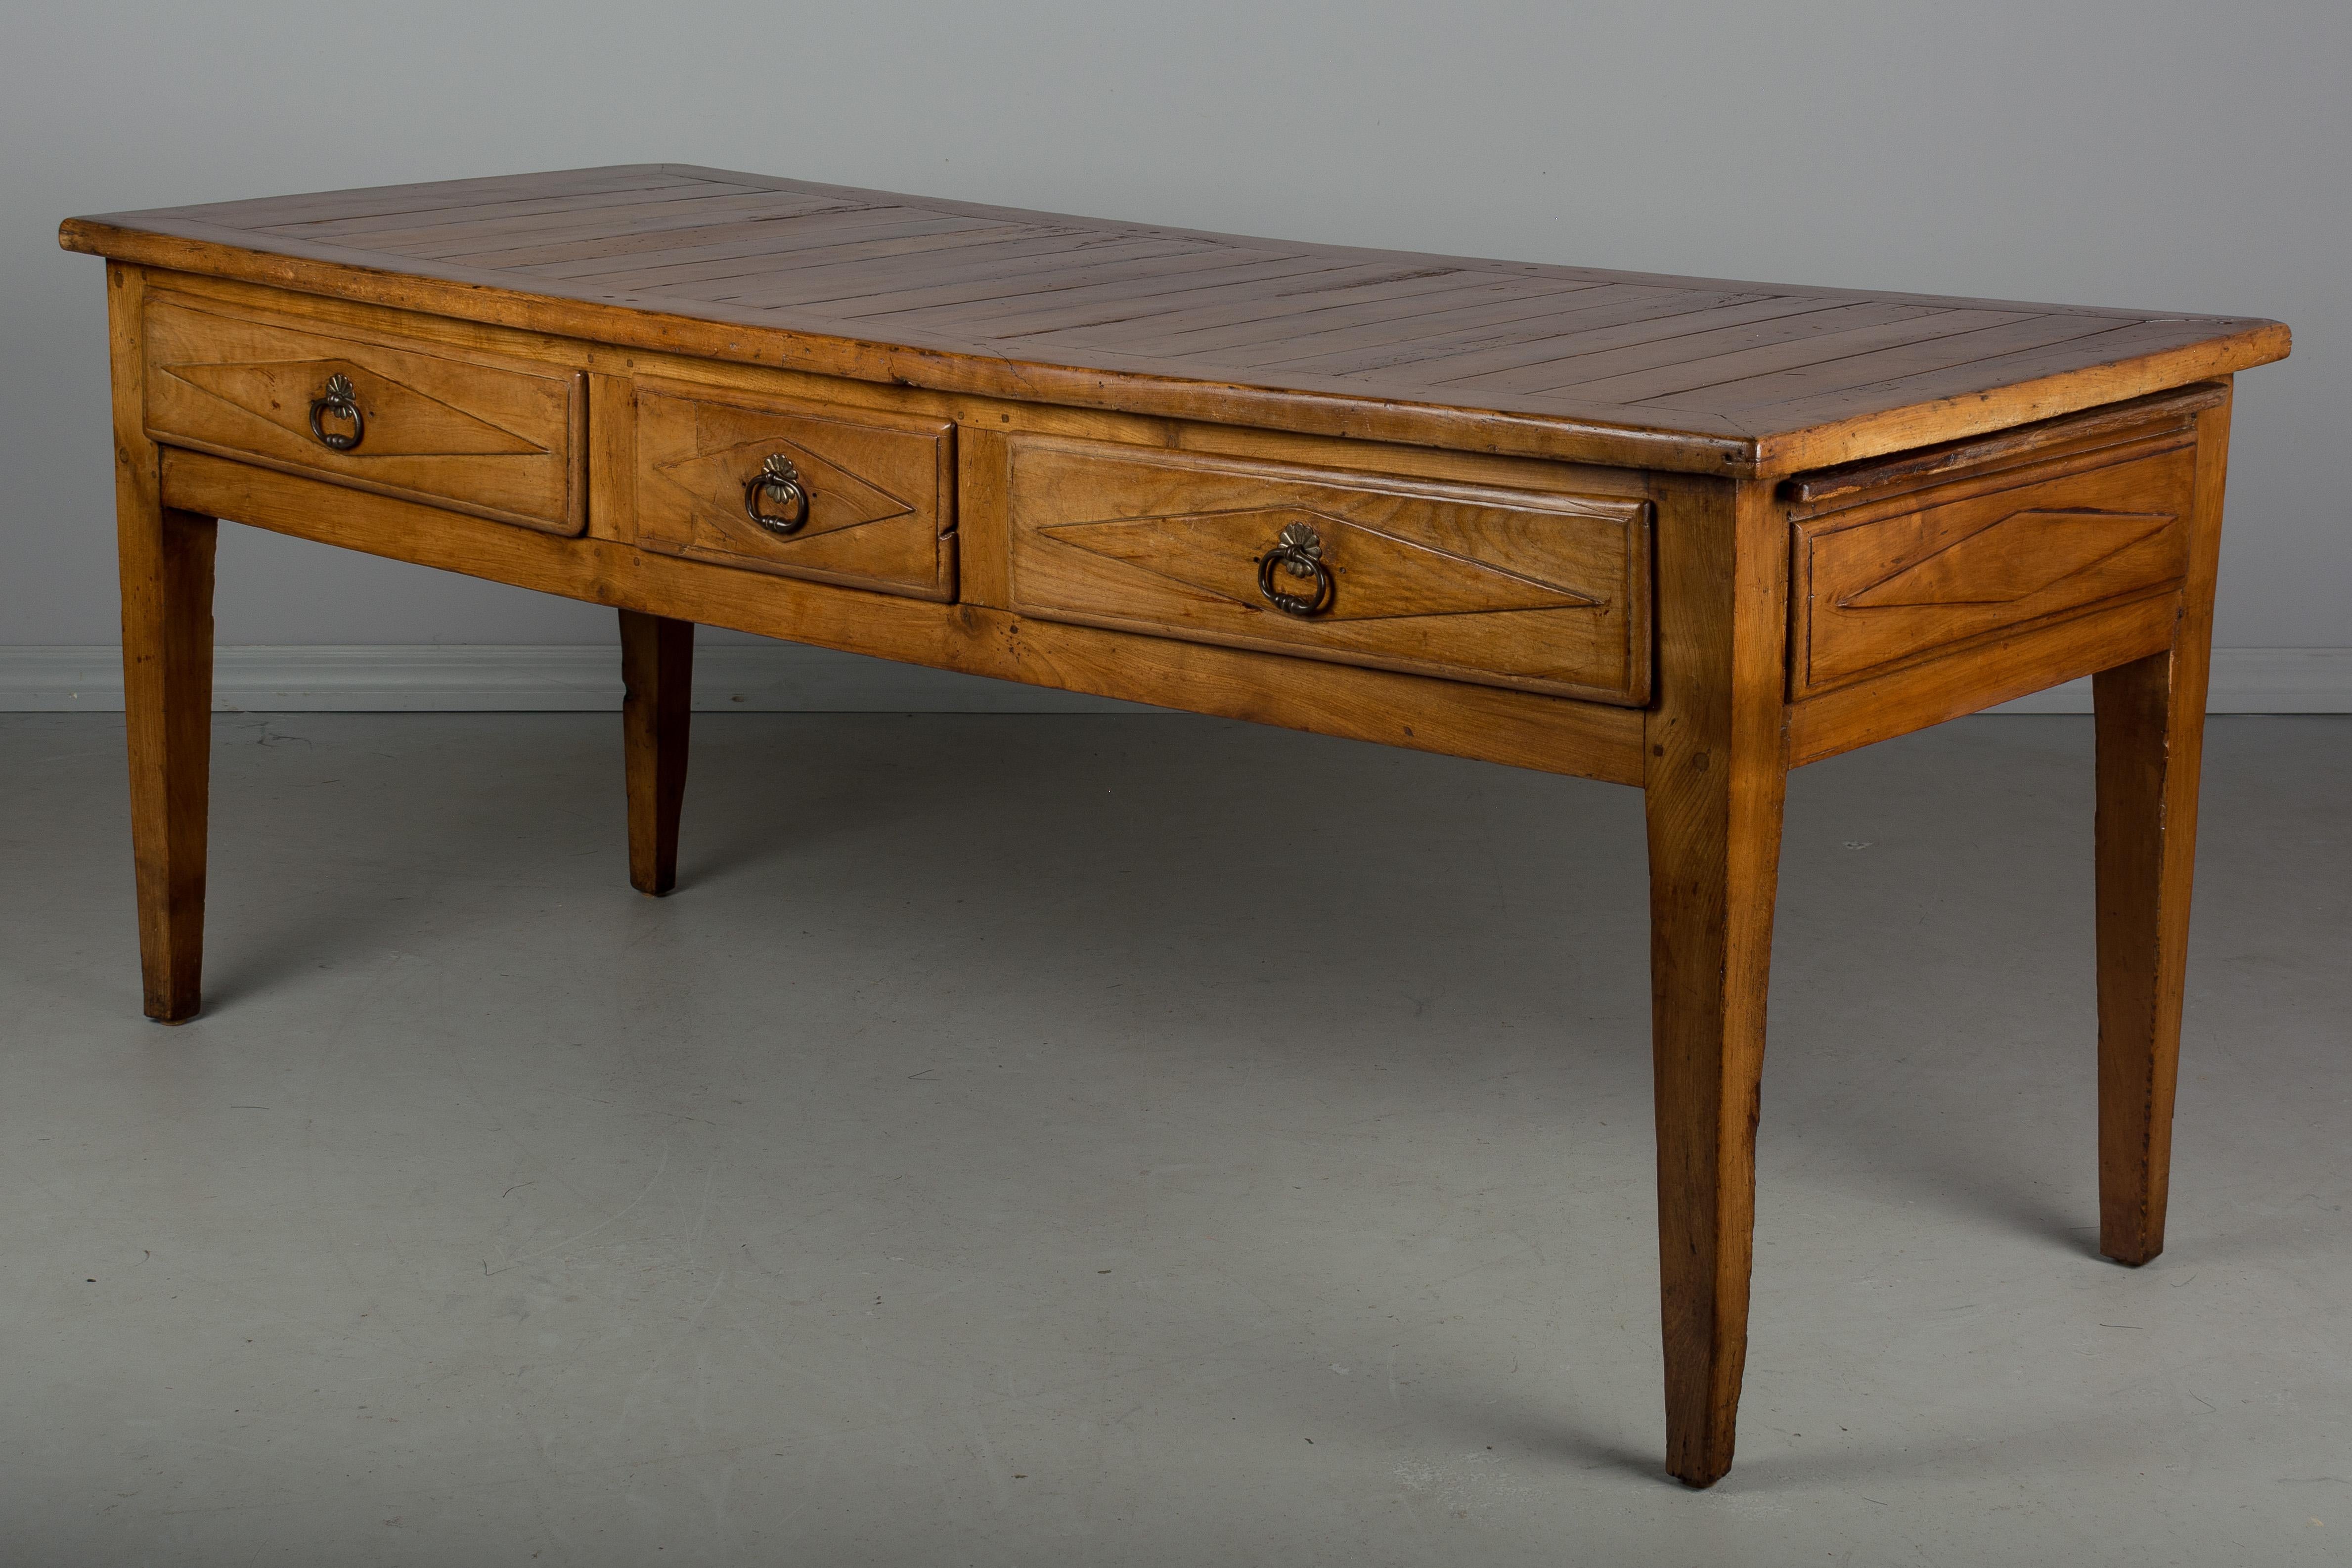 A 19th century, French Country table de Gibier from Normandy made of solid cherry. This was a hunt table for wild game and has three dovetailed drawers and a long pull-out cutting board. Finished on the back with faux drawers to match the front.